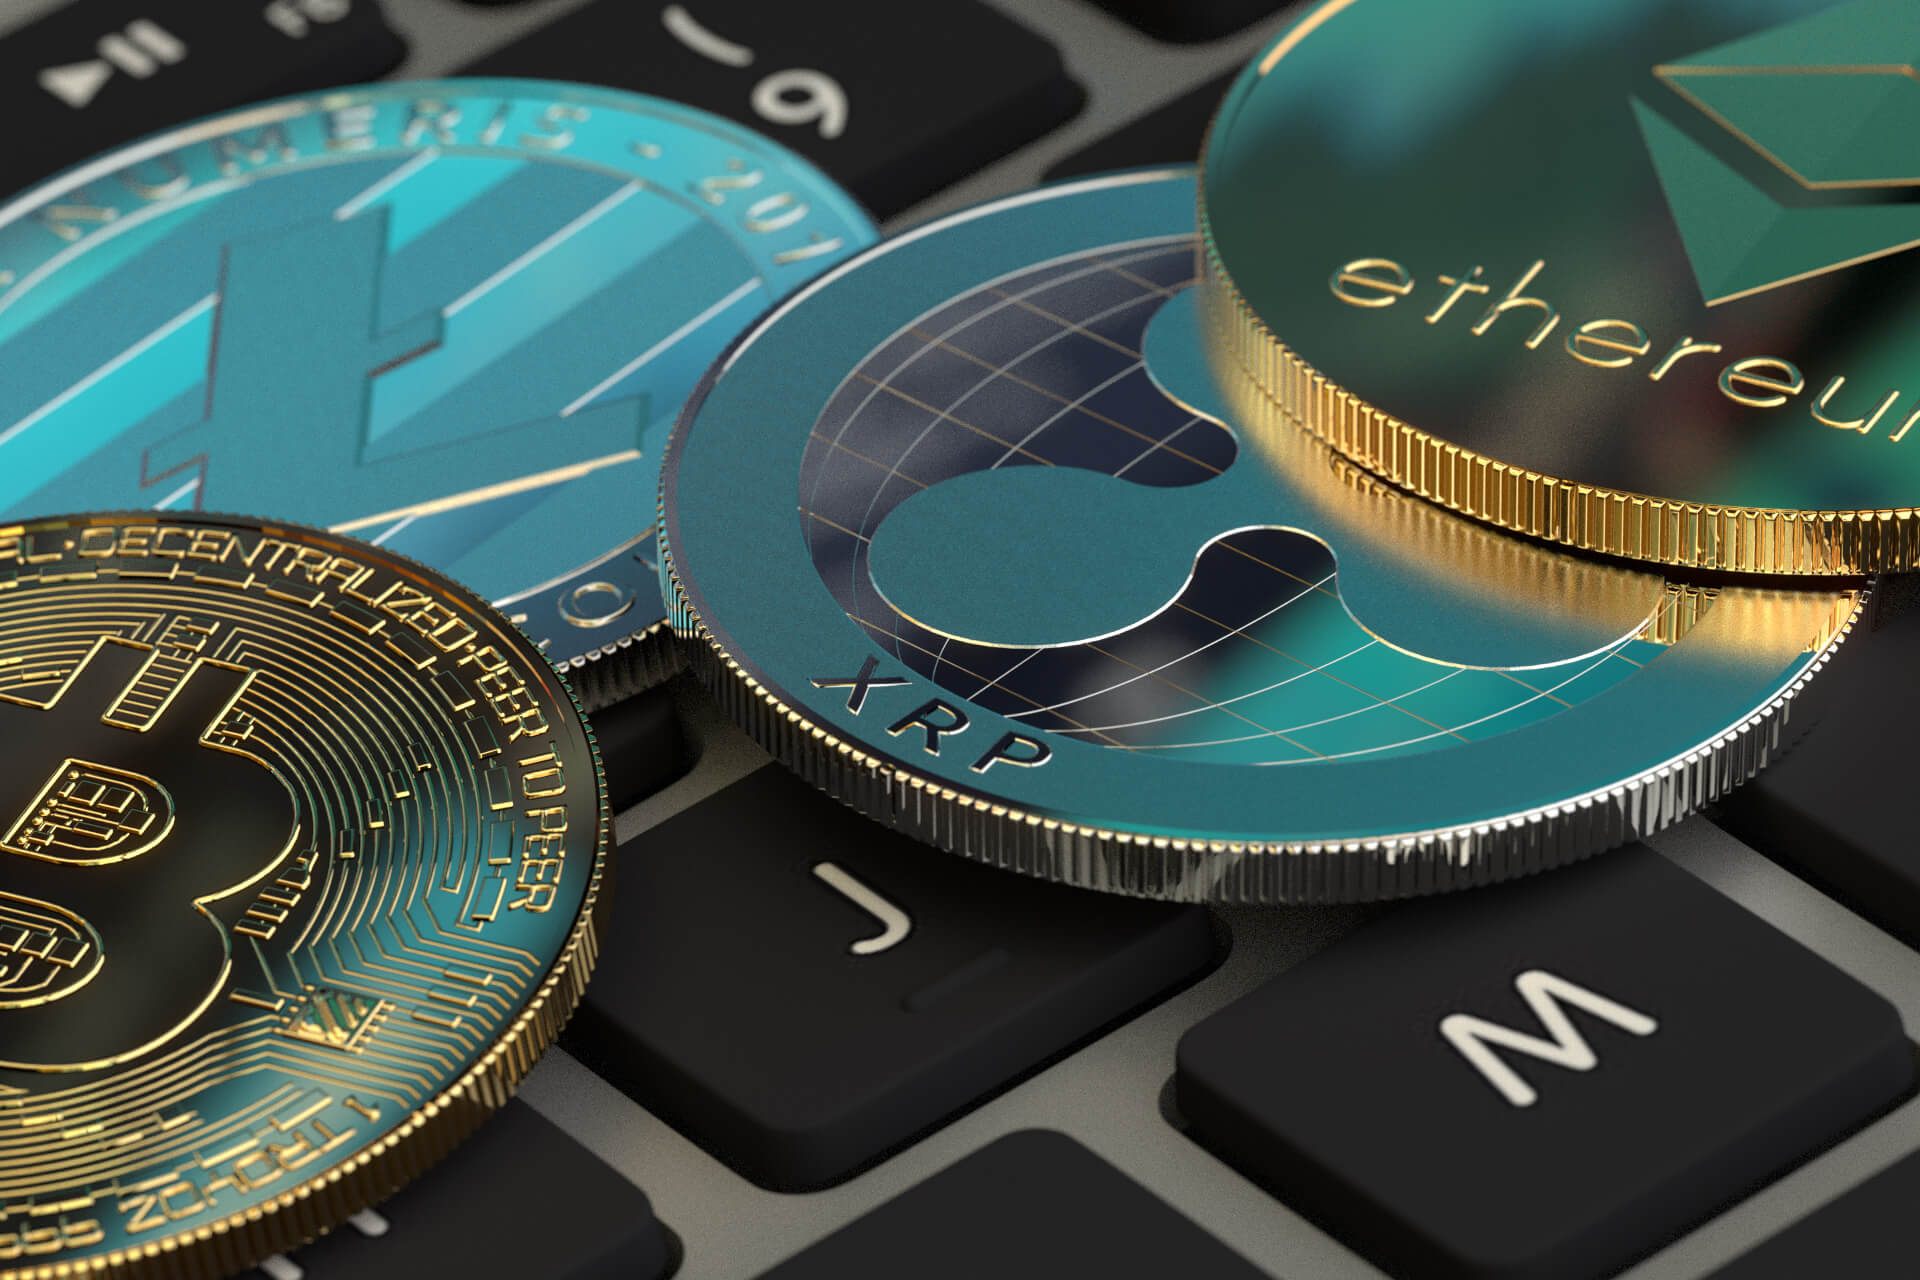 Crypto coins on keyboard free image download